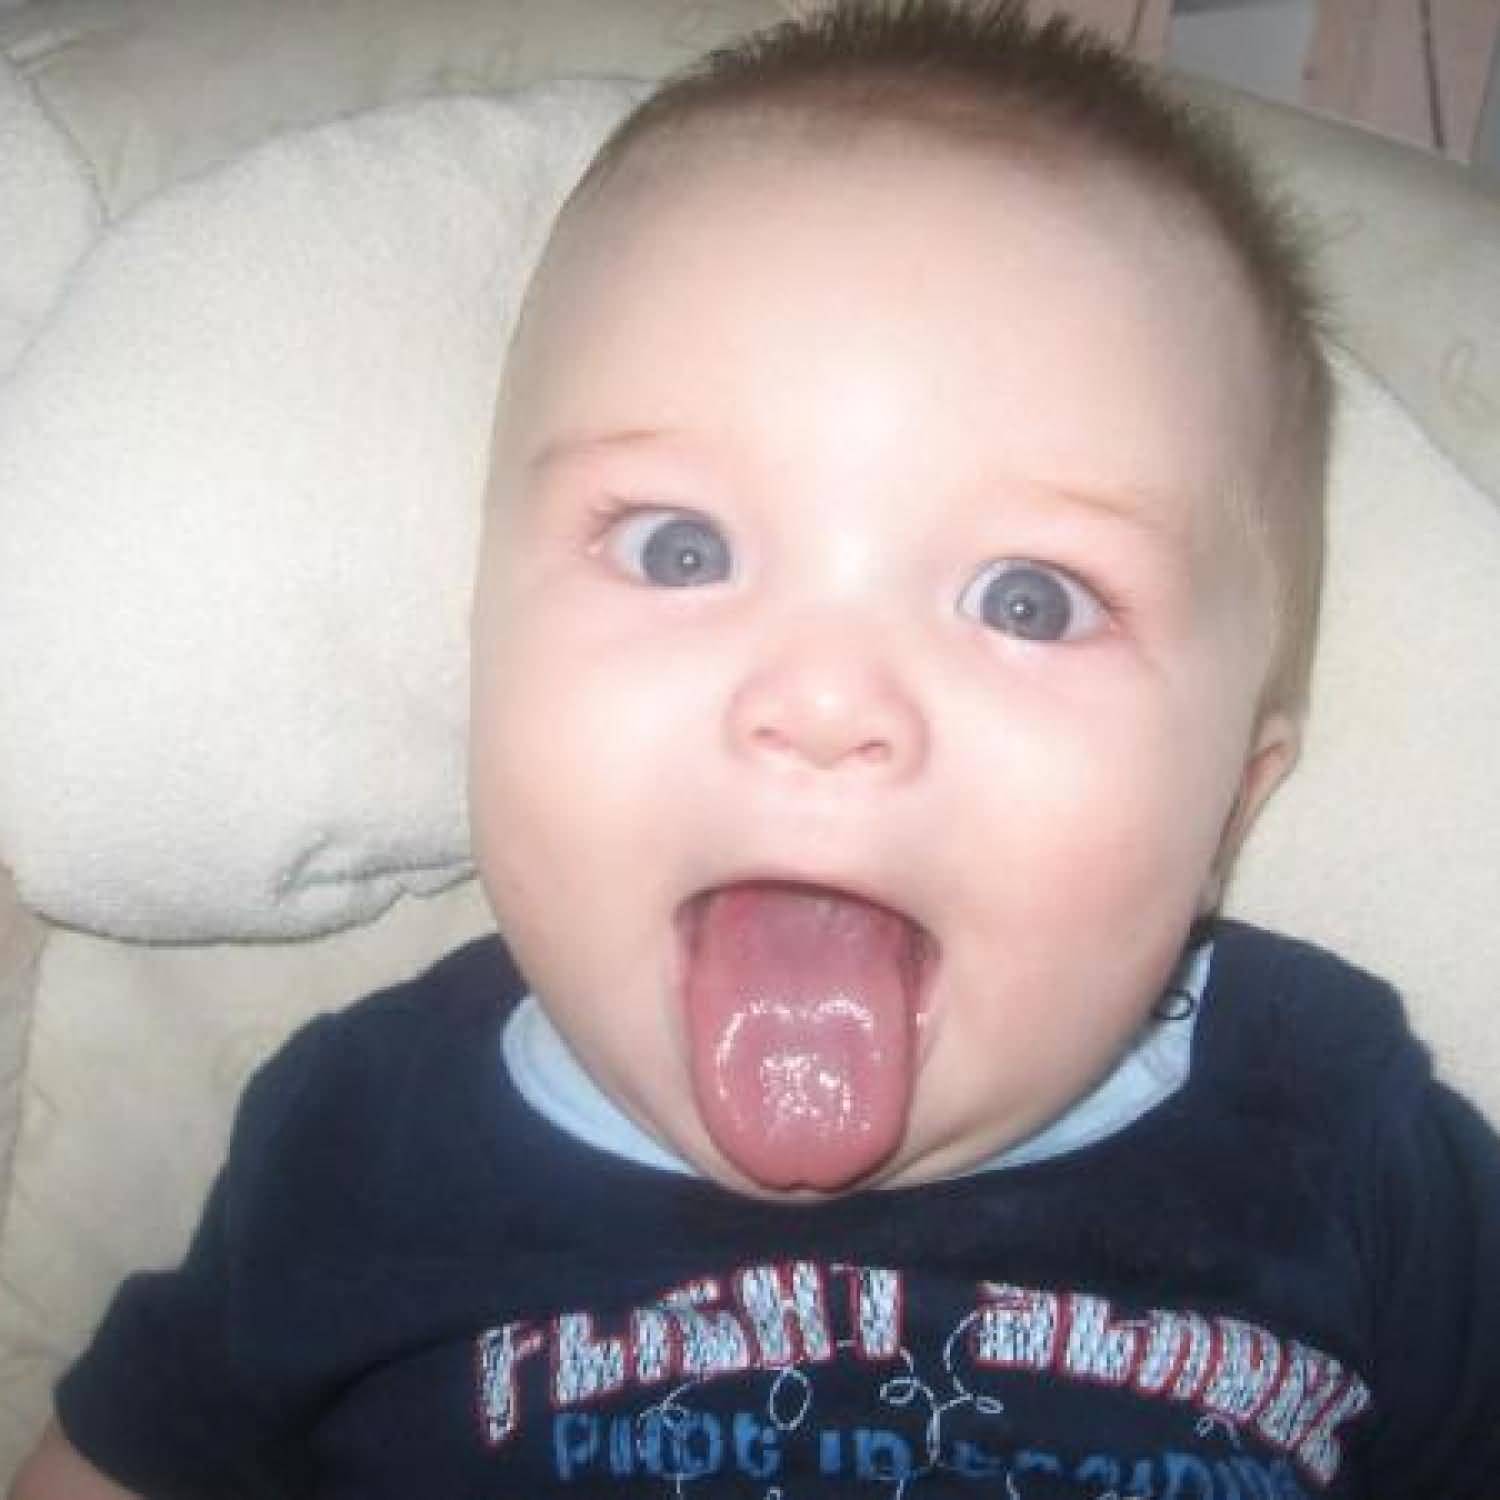 Tongue Out Baby Funny Image